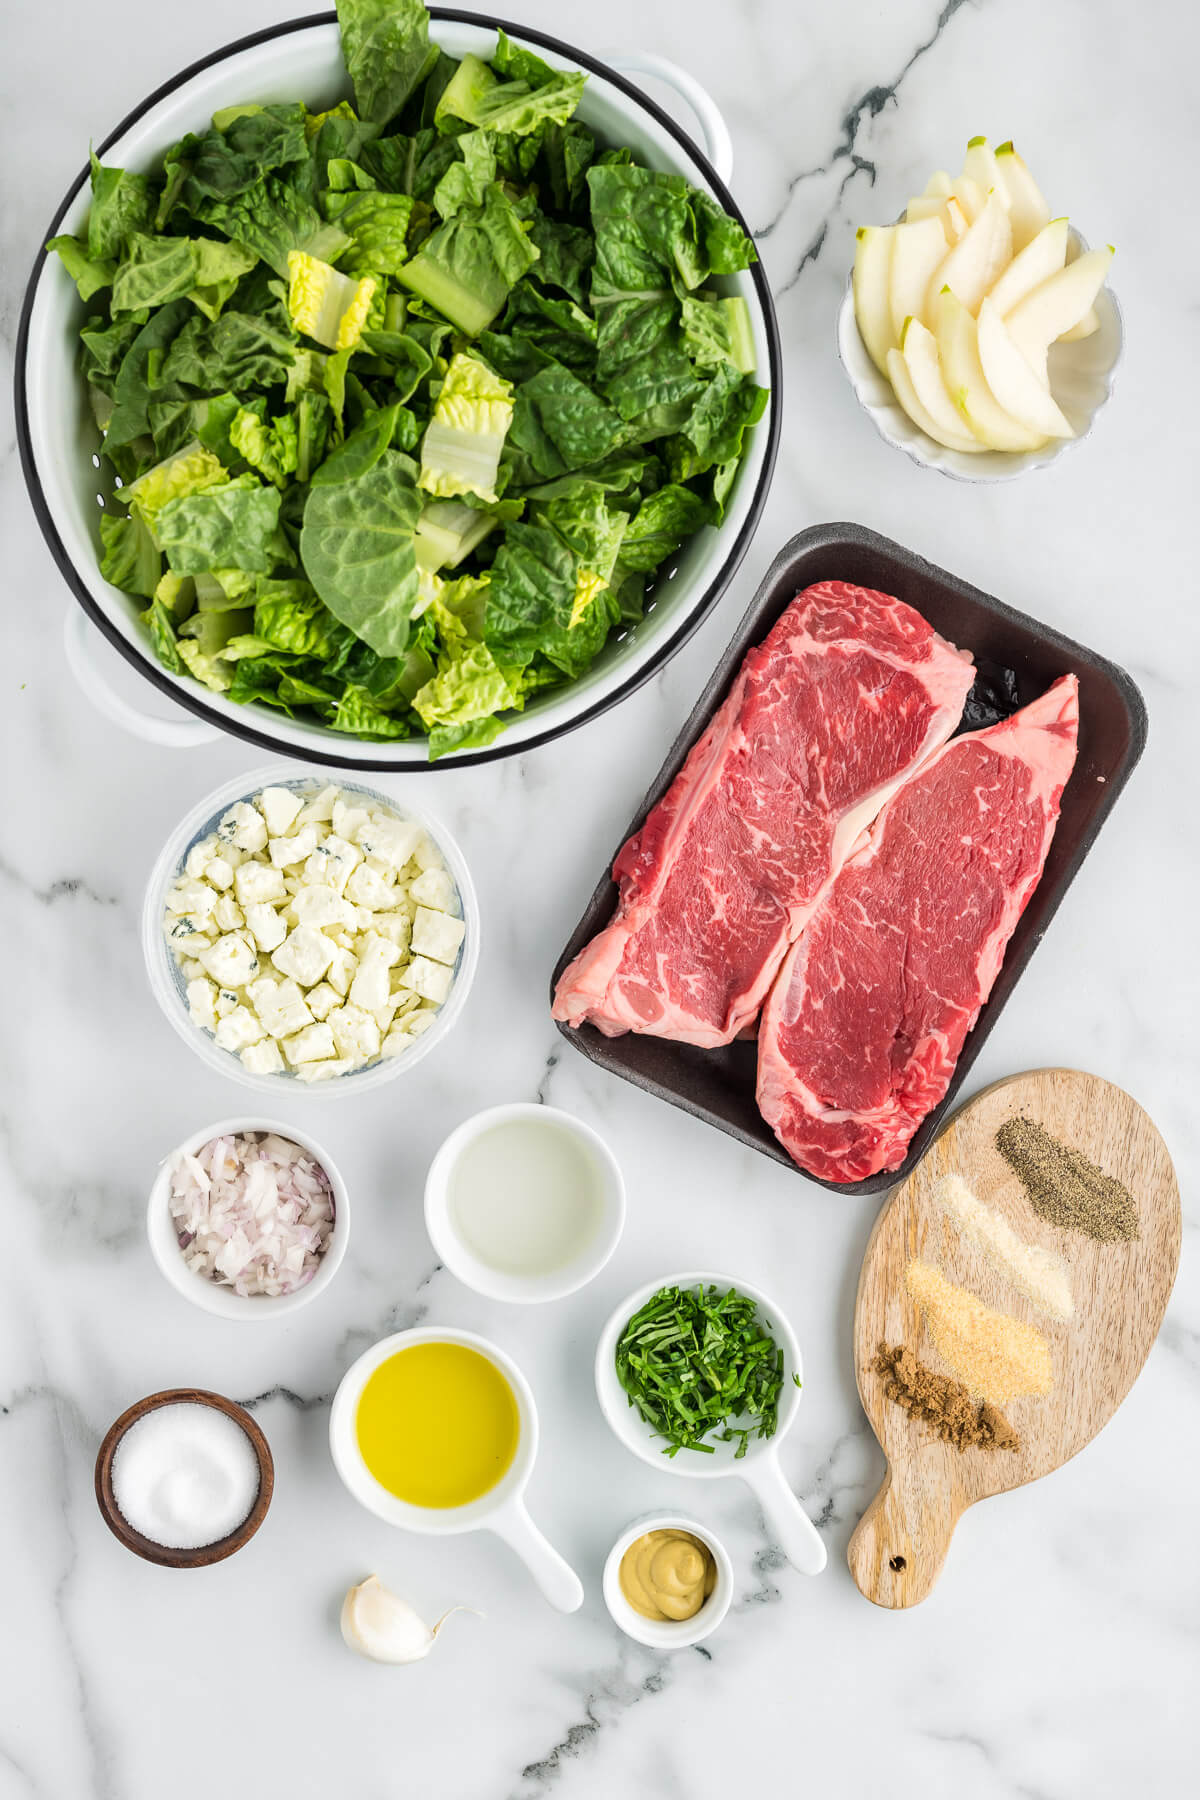 ingredients for grilled steak salad on a table.